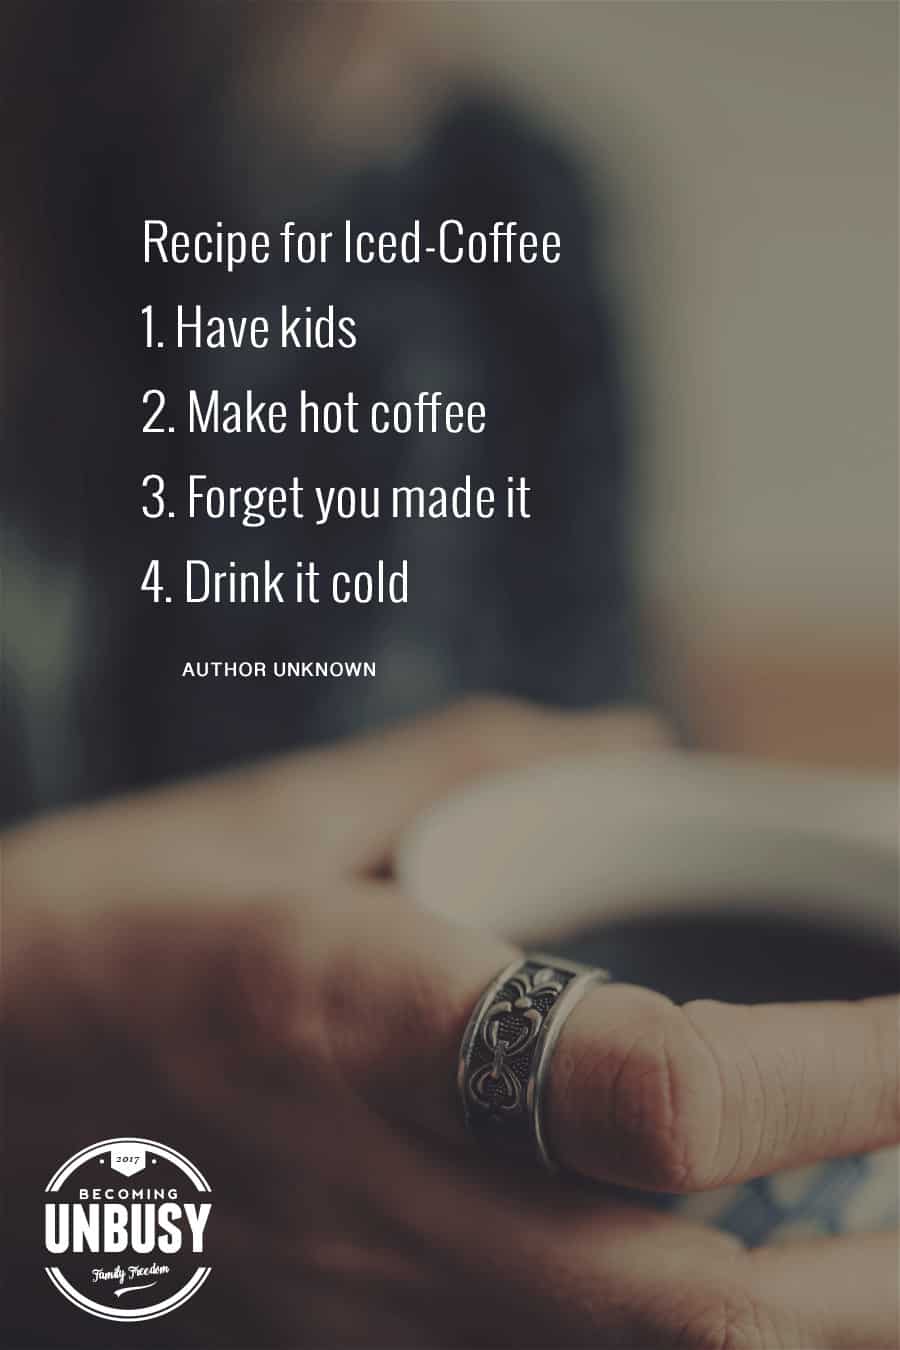 Recipe for Iced-Coffee â€” Have kids, Make hot coffee, Forget you made it, Drink it cold #motherhood *So true!